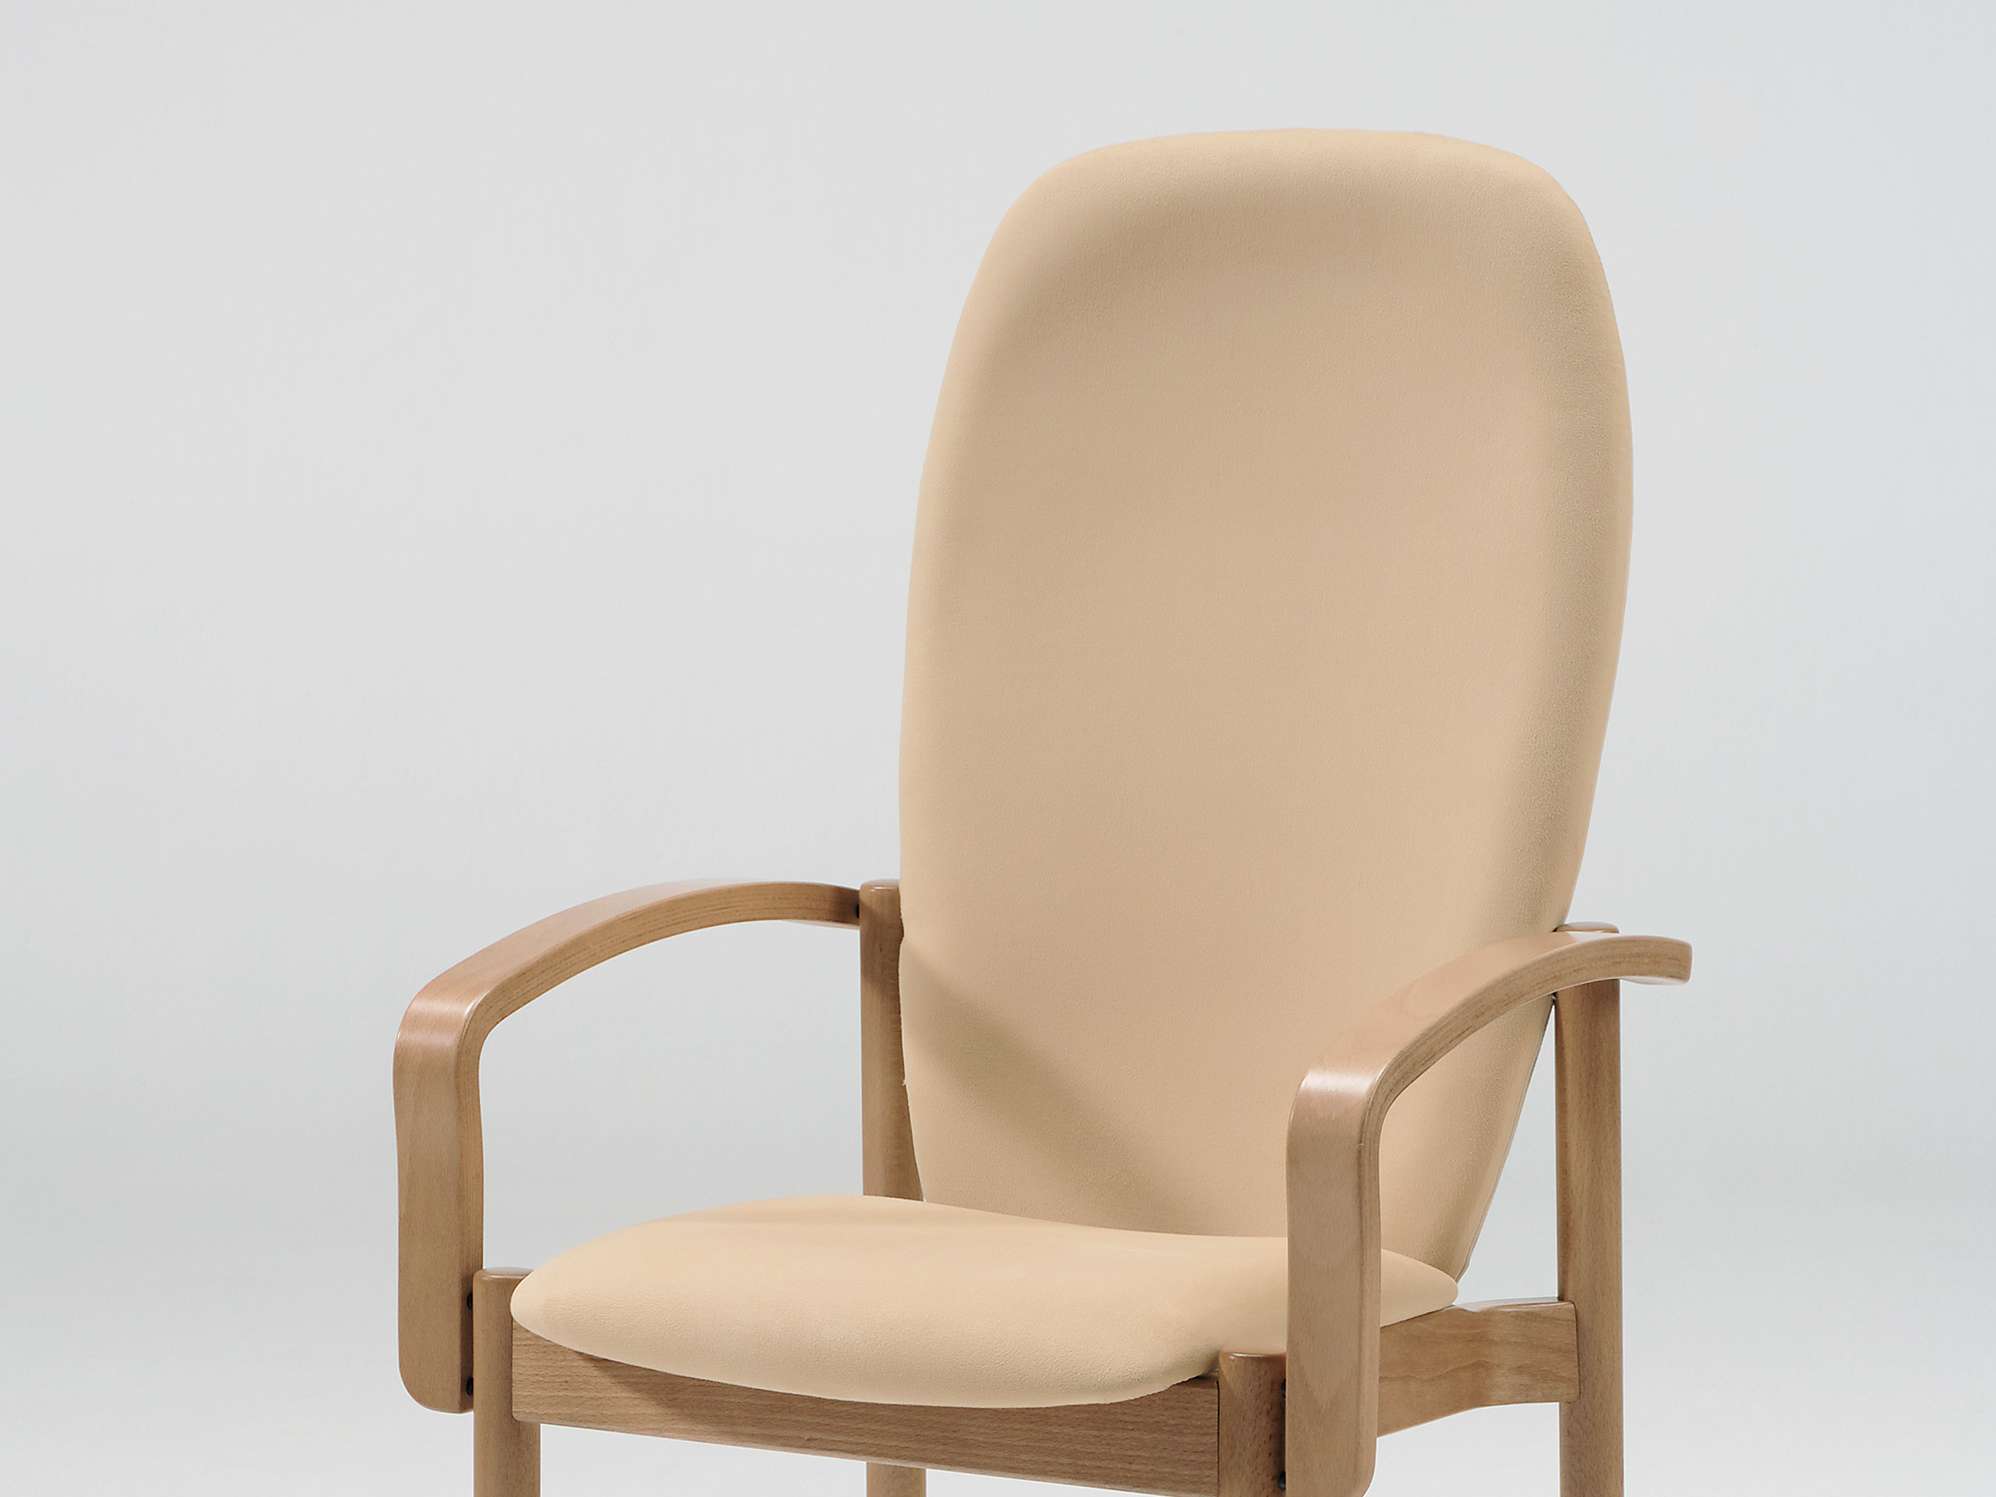 The Optimo model as a stacking chair with a high back